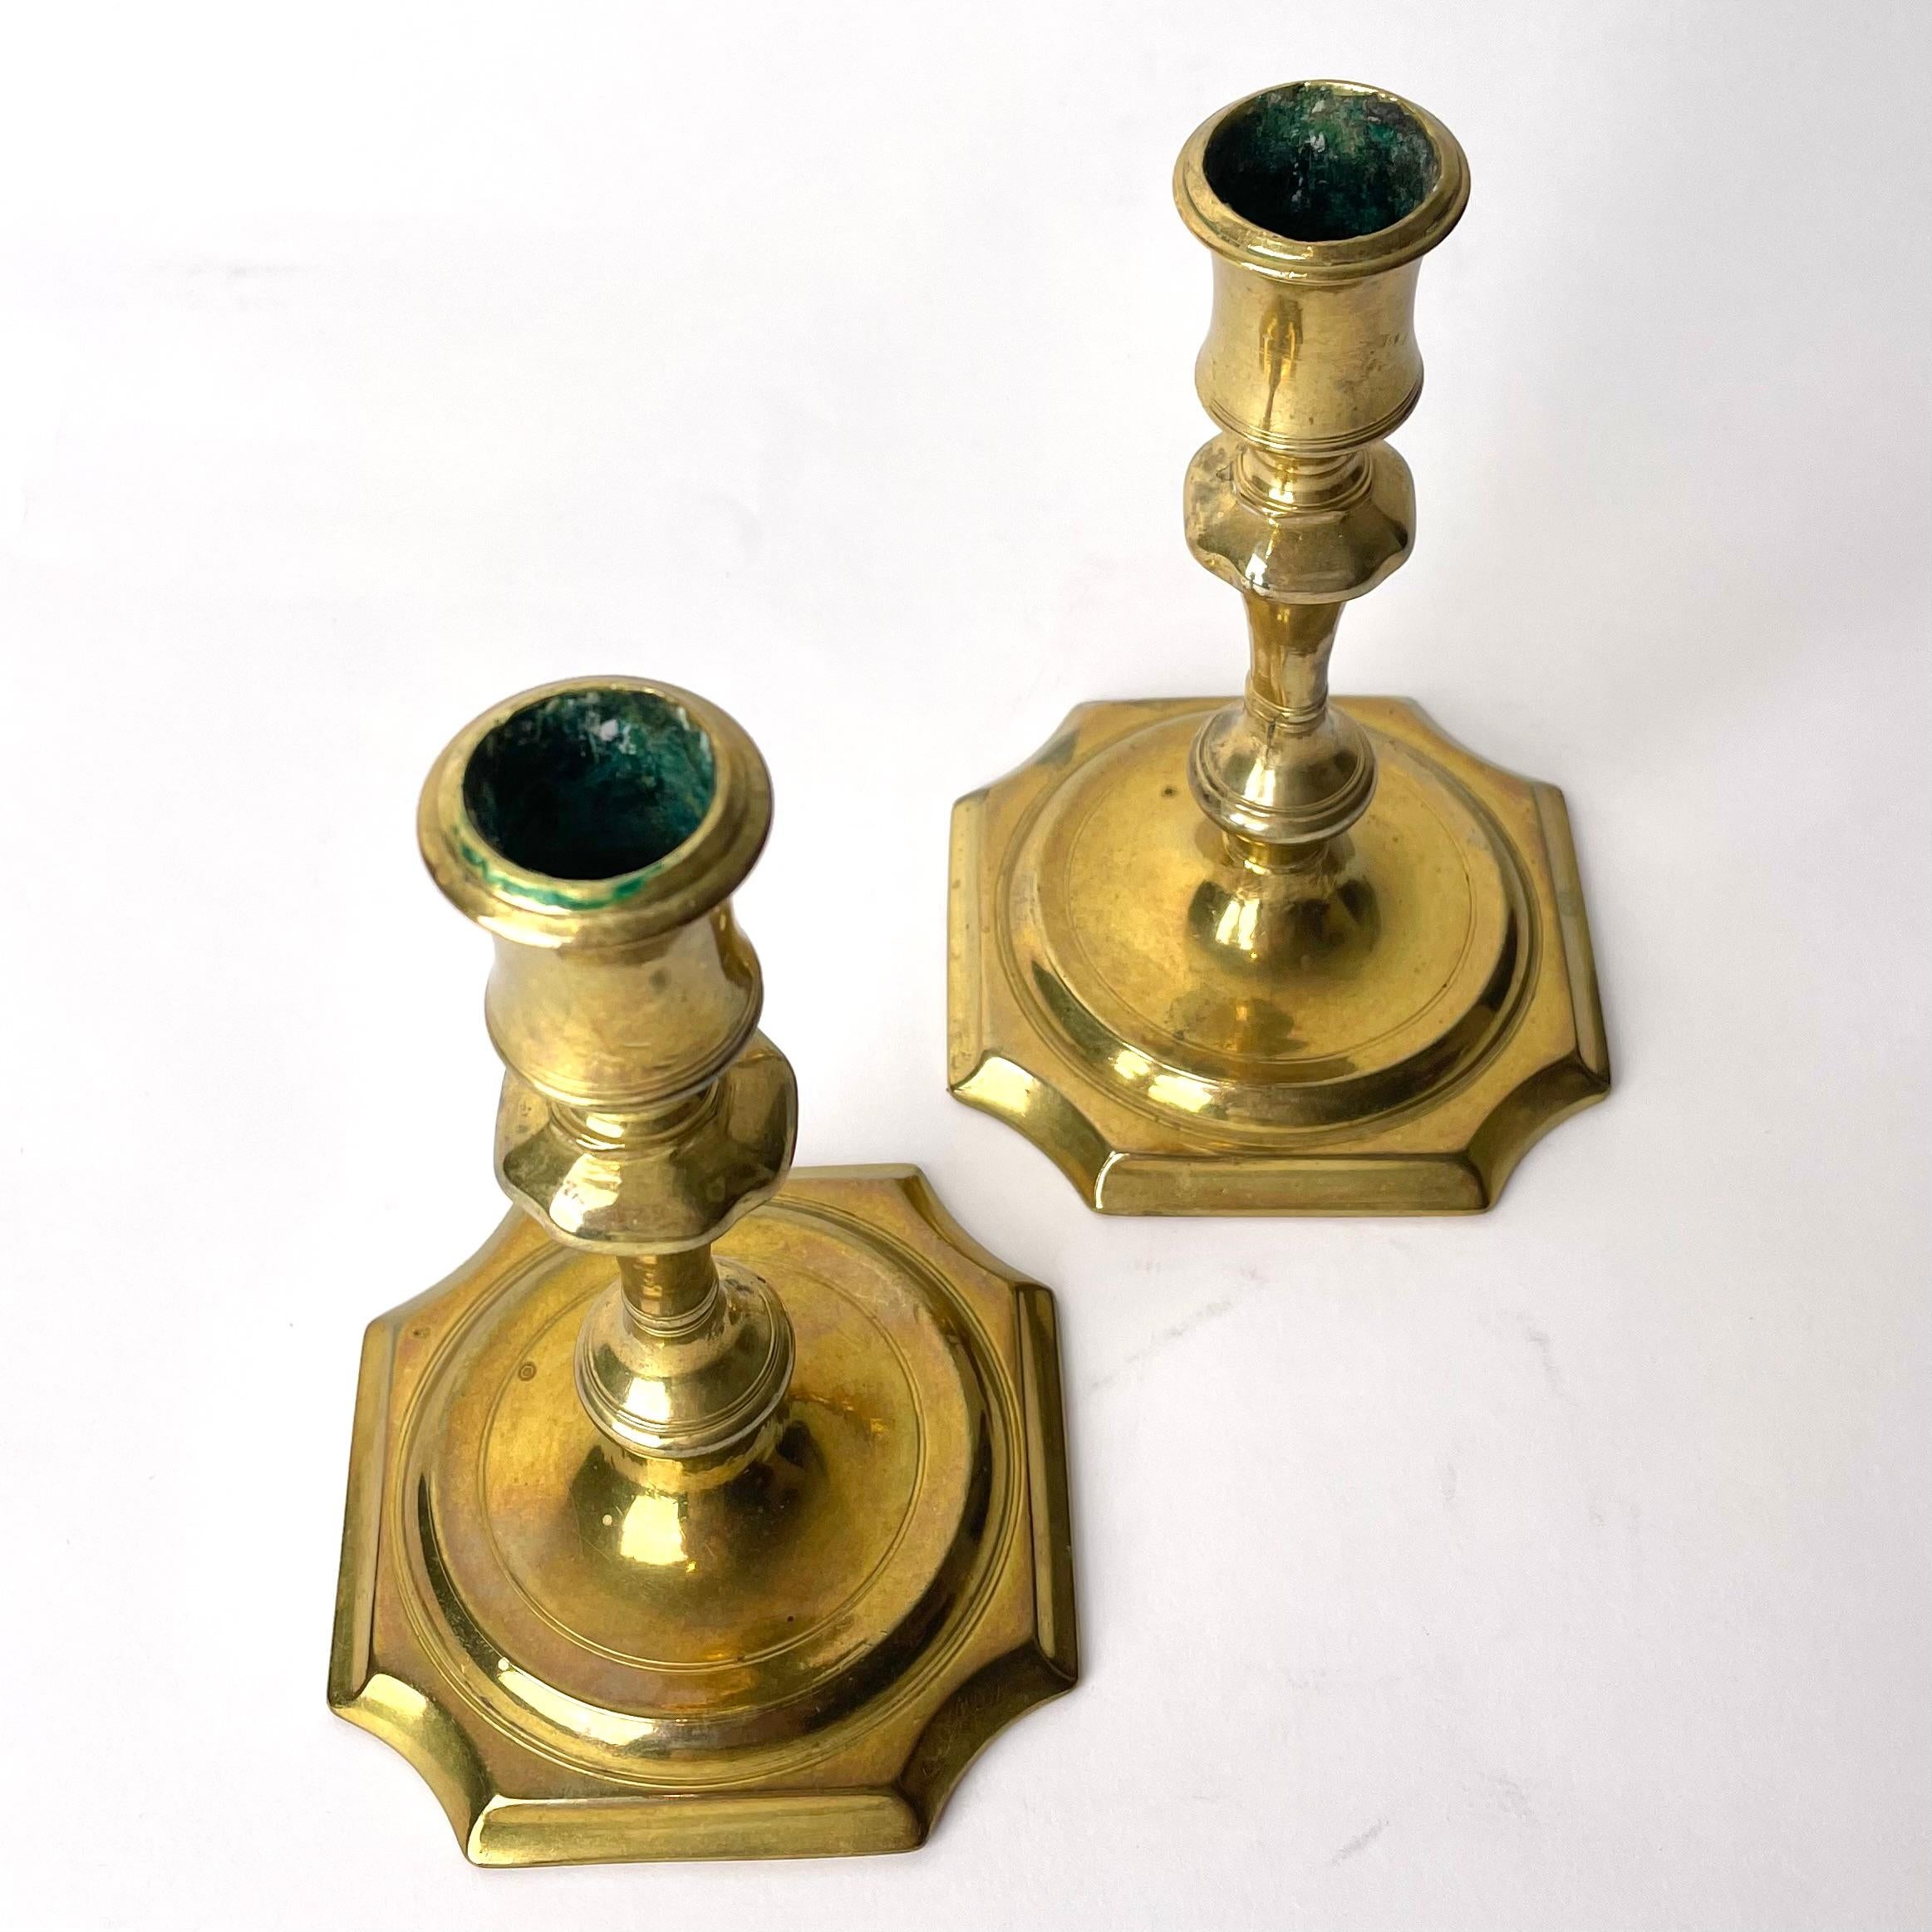 A Pair of 2 Lovely Brass Candlesticks, Late Baroque, Early 18th Century In Good Condition For Sale In Knivsta, SE